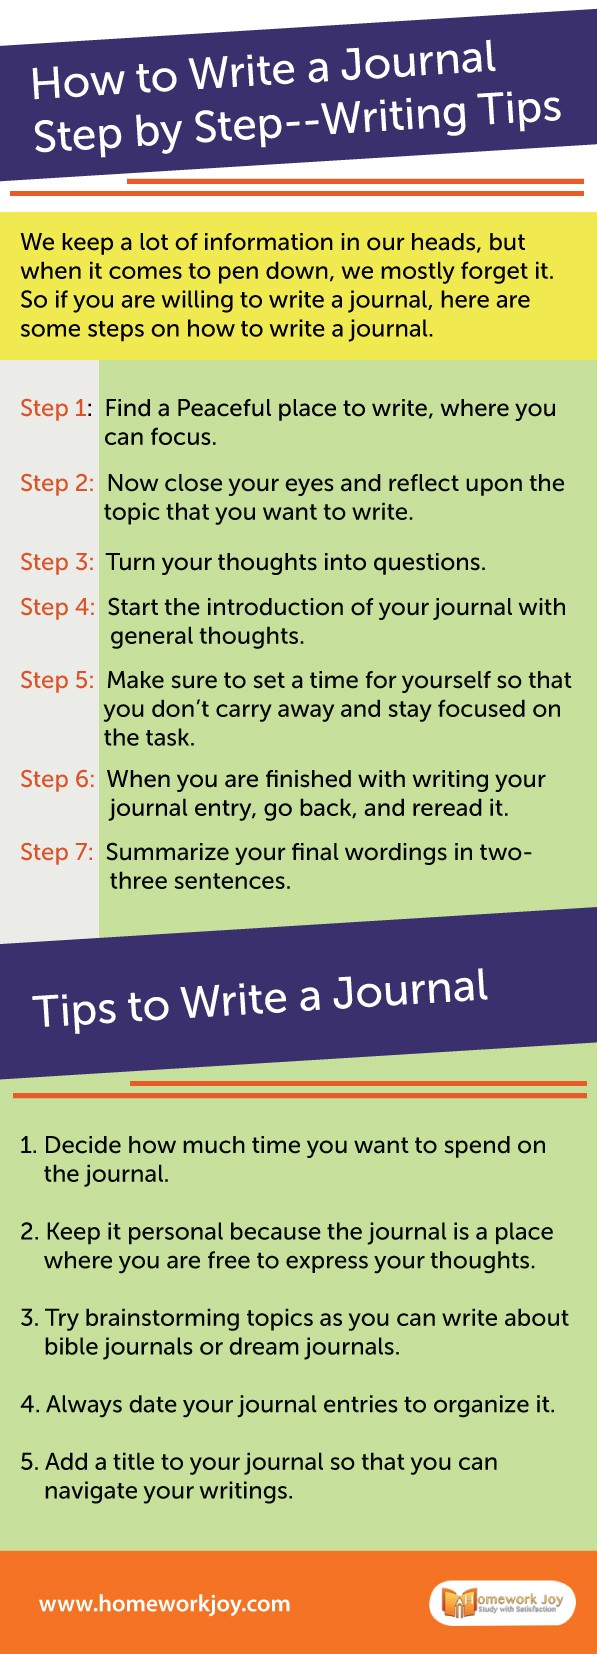 how-to-write-a-journal-step-by-step-writing-tips